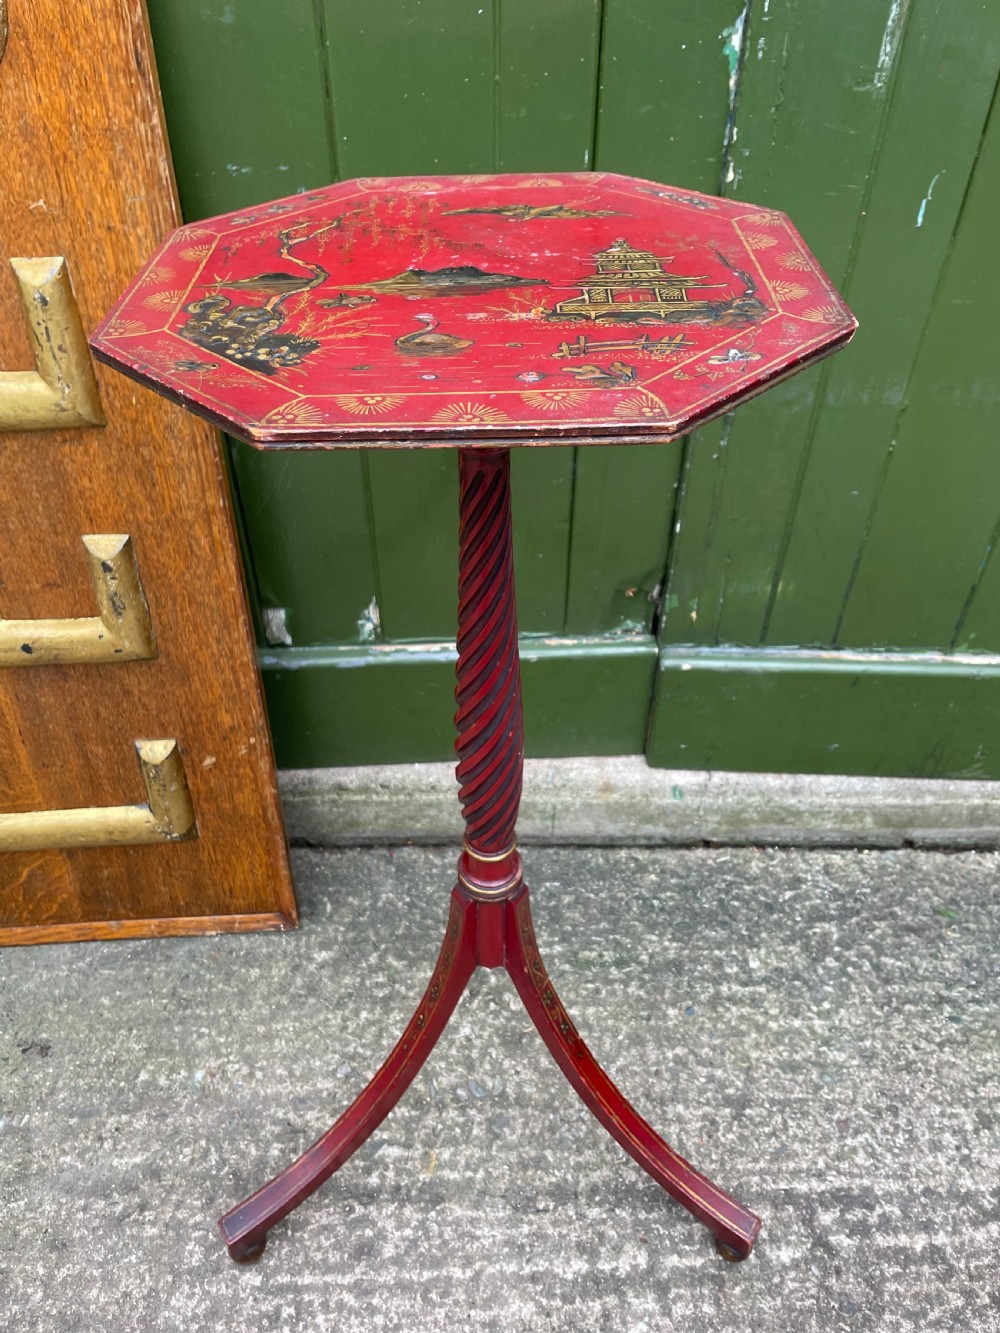 late 19th early c20th chinoiserie decorated vermilion red lacquer tripod table or candlestand in the late c18th george iii period style